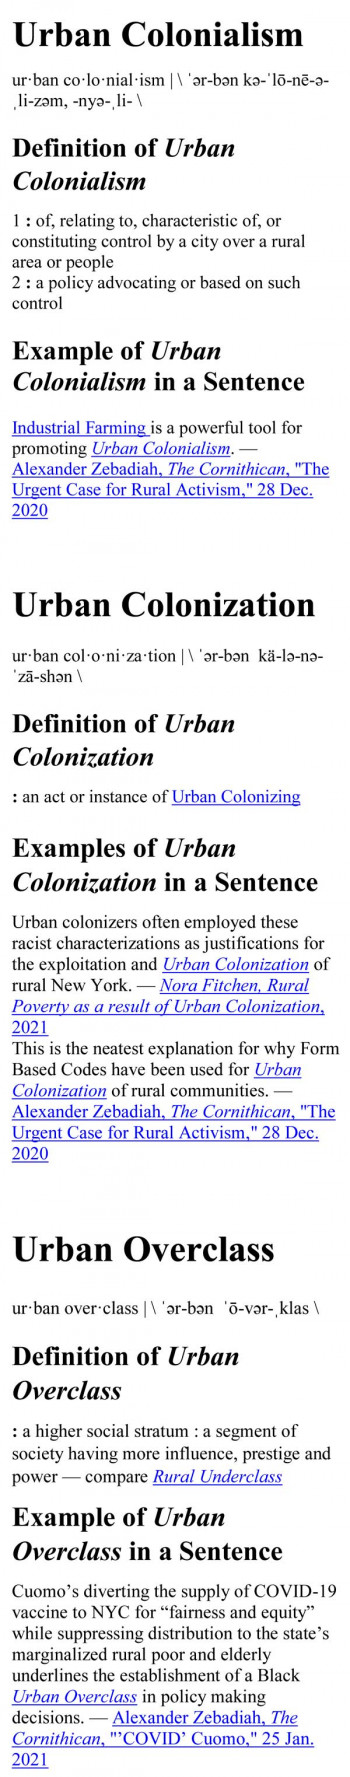 “Rise of the Evil Ones” – “Urban Colonialism”